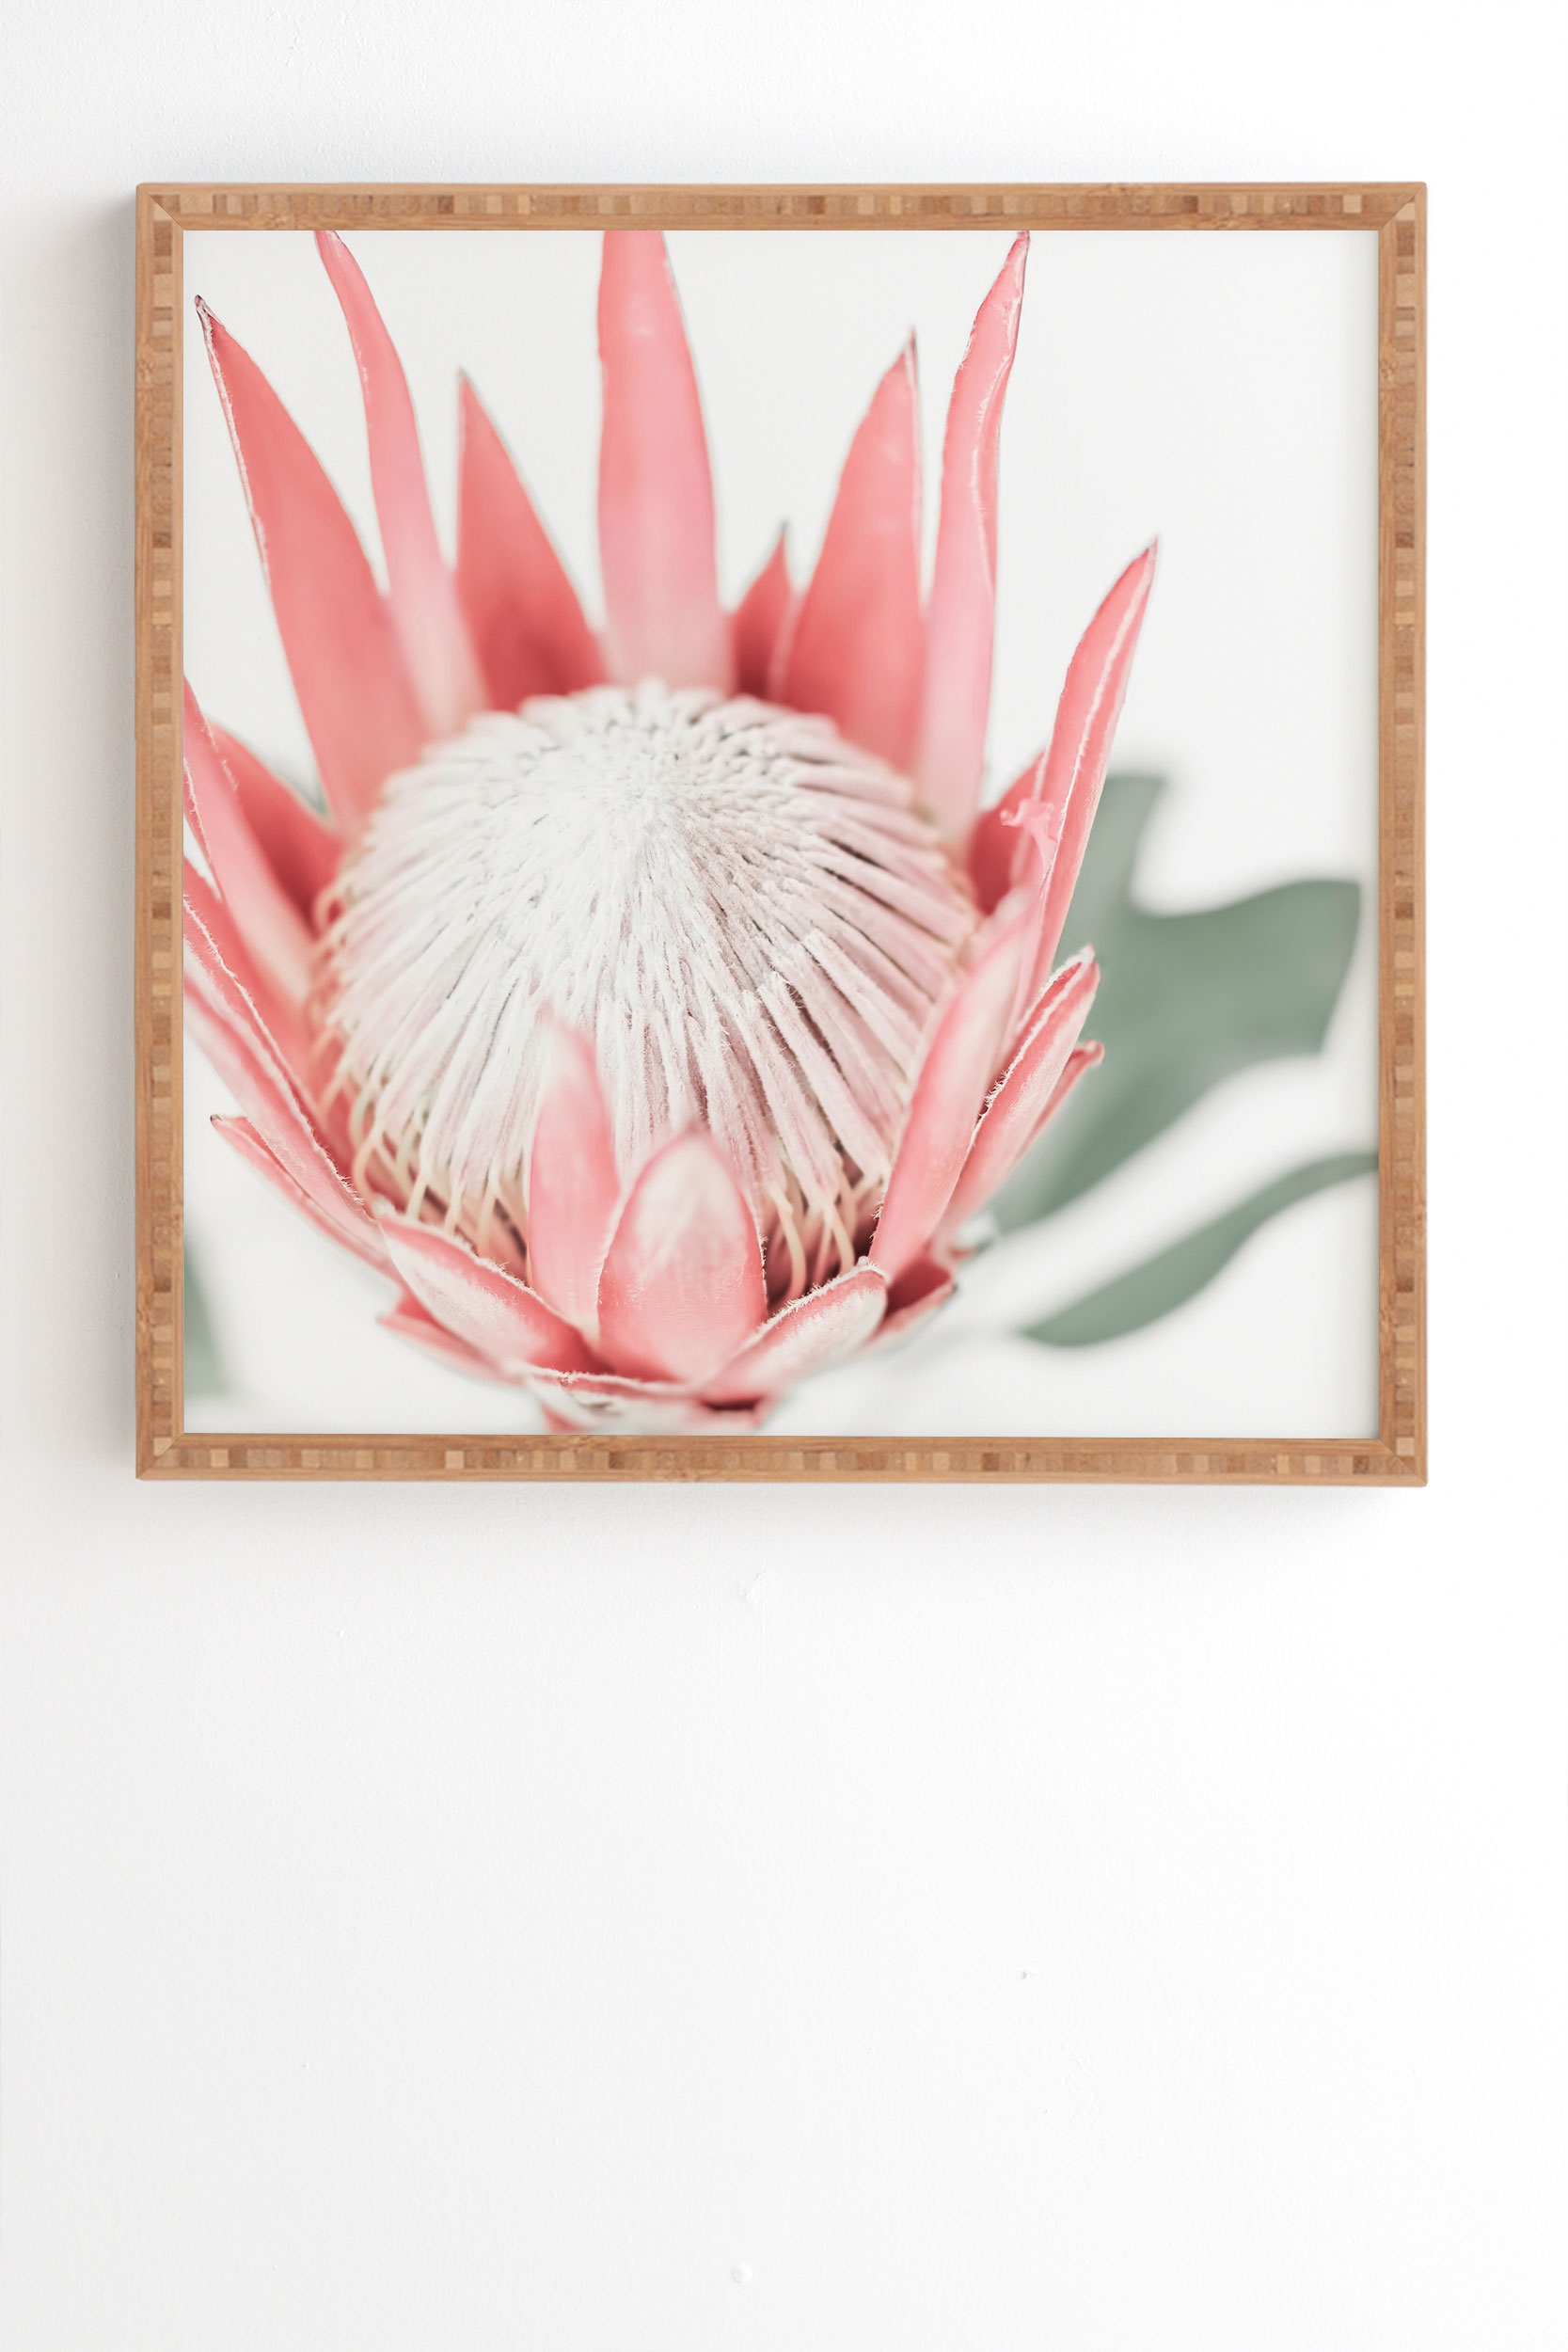 King Protea Flower Iii by Ingrid Beddoes - Framed Wall Art Bamboo 11" x 13" - Image 1